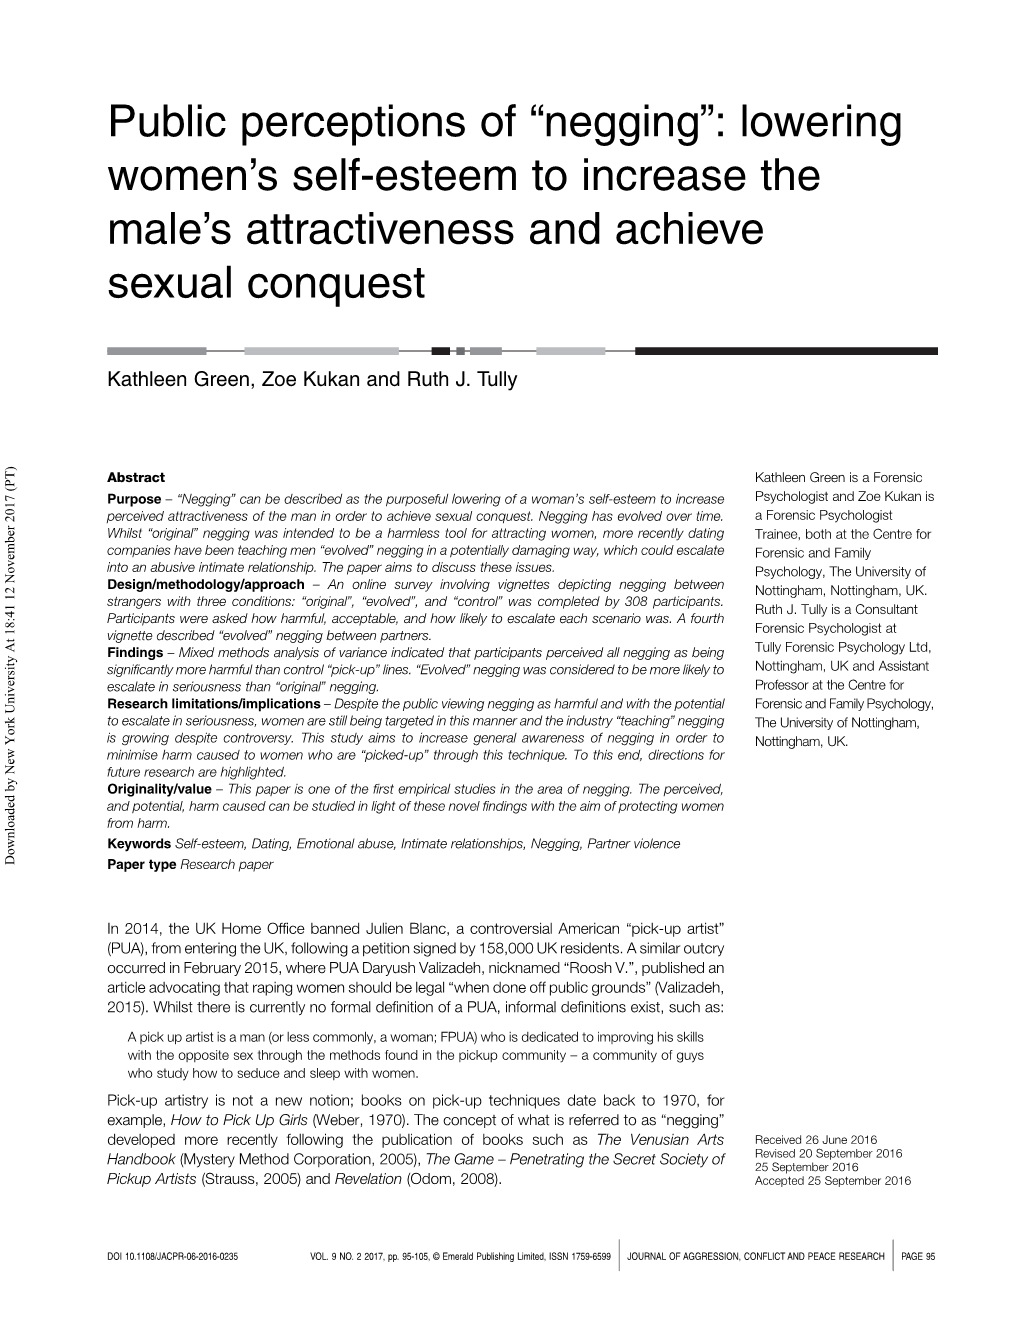 Negging”: Lowering Women’S Self-Esteem to Increase the Male’S Attractiveness and Achieve Sexual Conquest